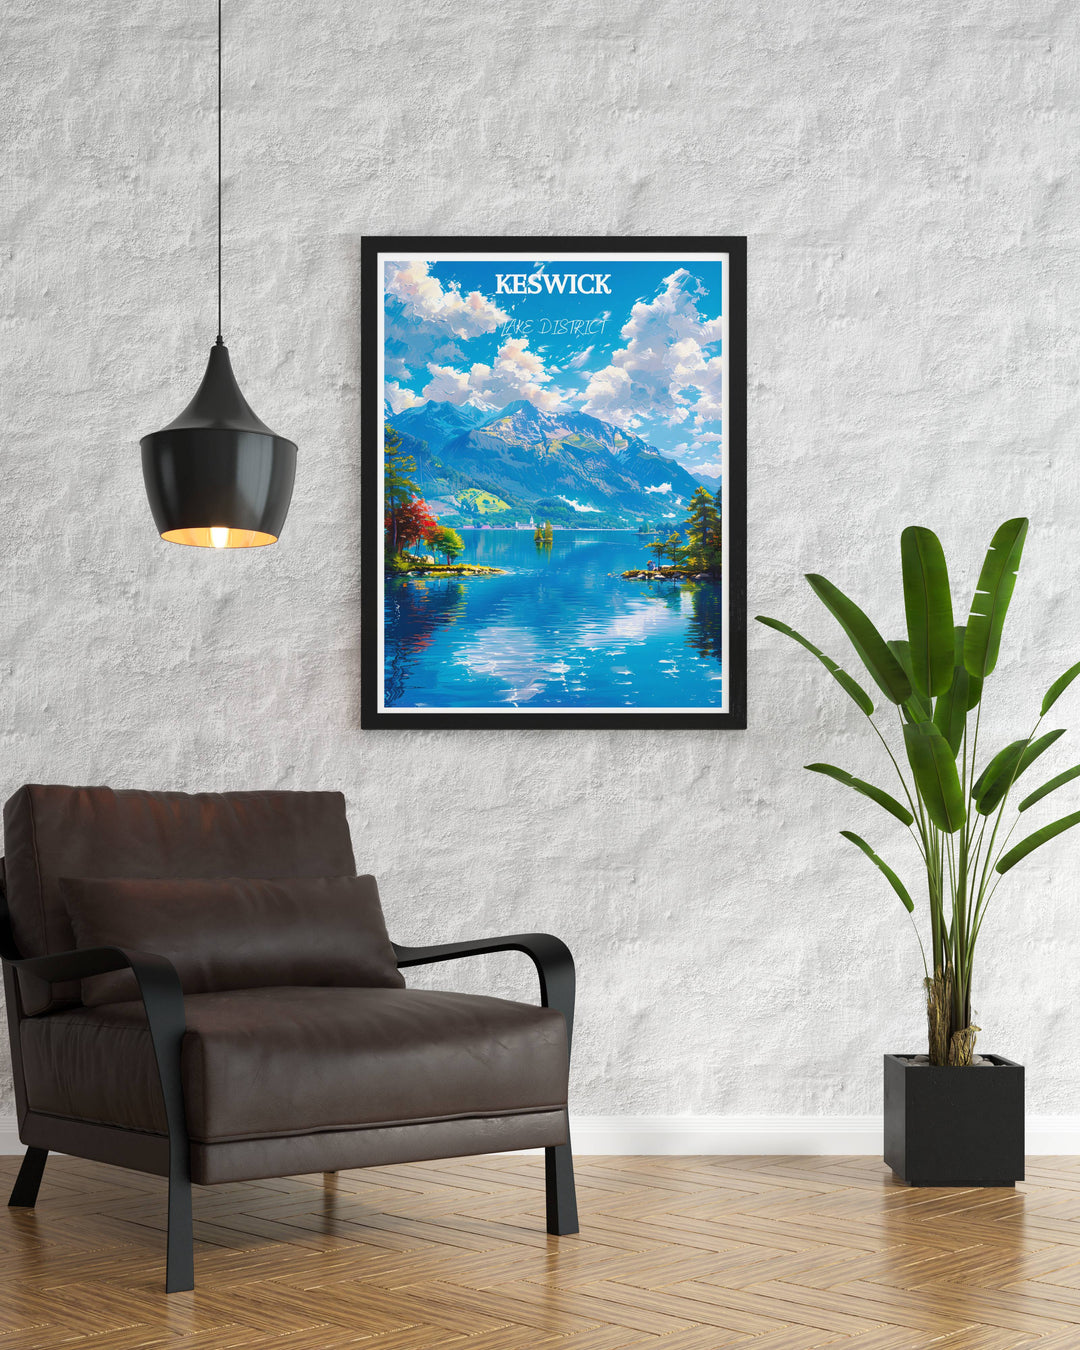 Stylish abstract map of the Lake District, crafted with bold strokes and contrasting colors to creatively highlight geographical features like lakes and mountains.